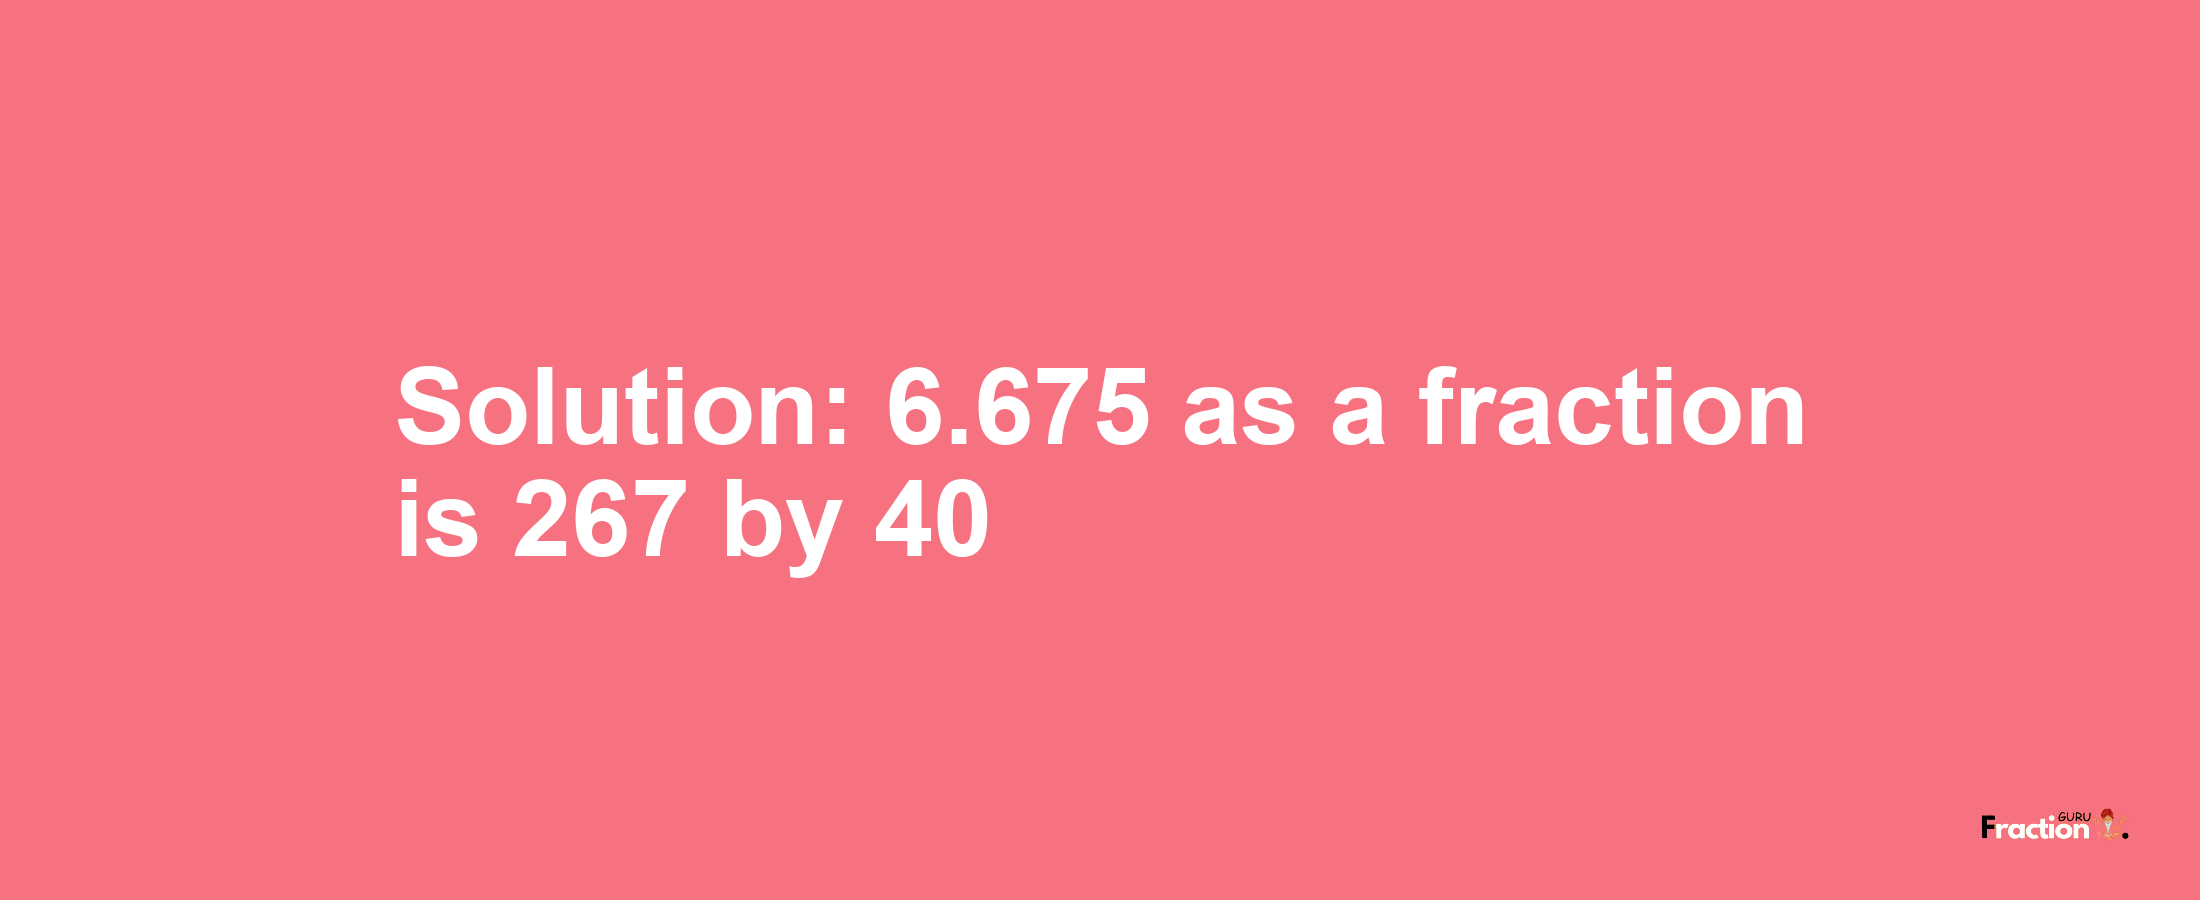 Solution:6.675 as a fraction is 267/40